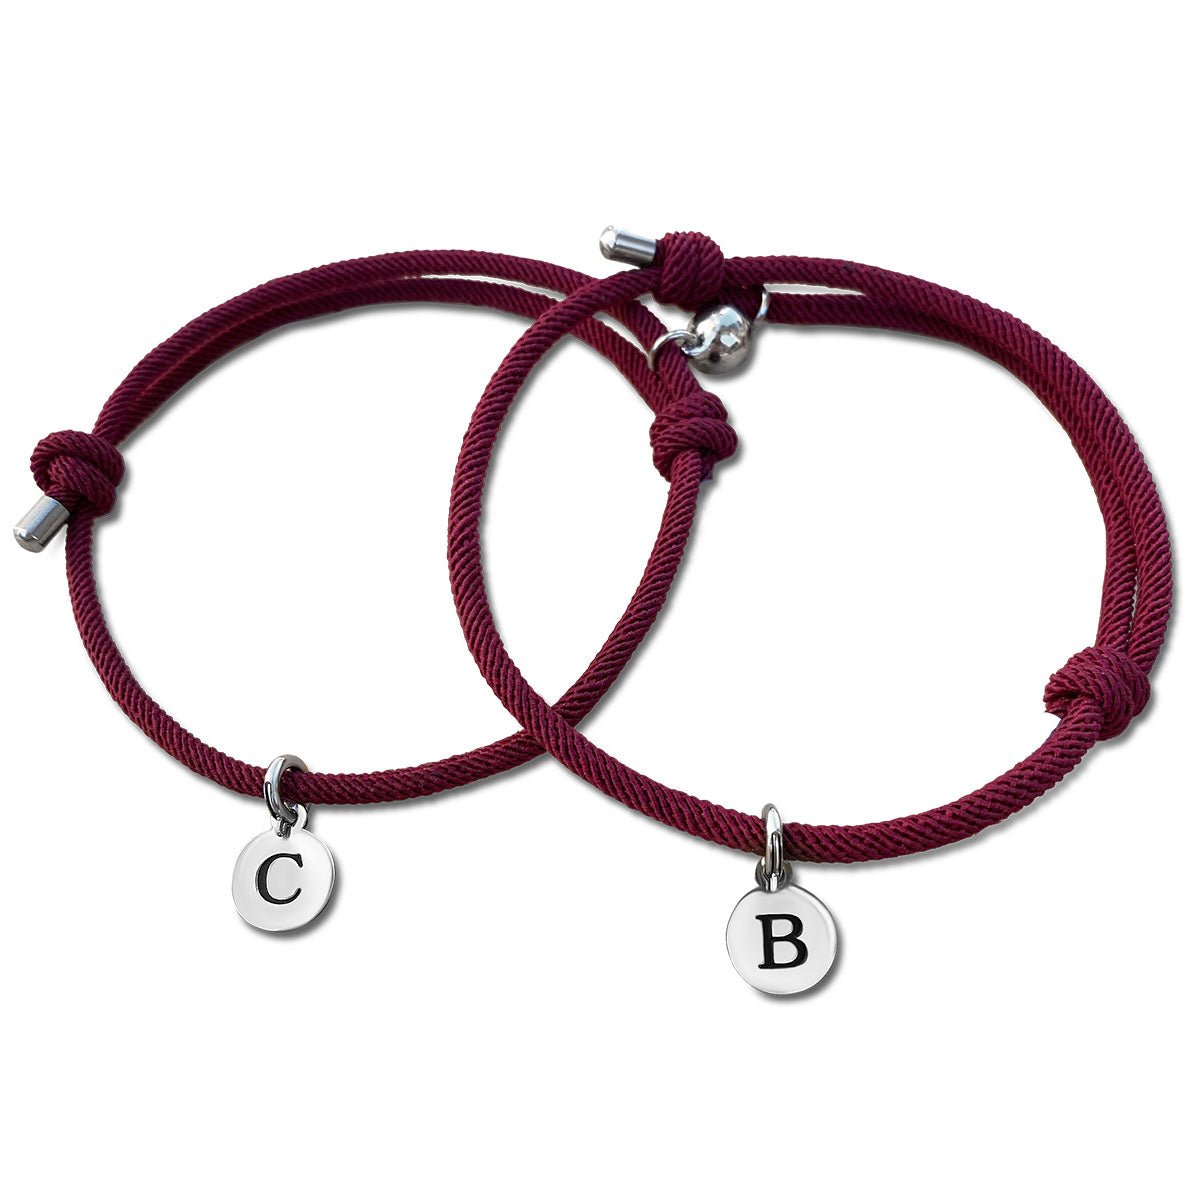 Magnetic Couple Bracelets with Custom Letters Charms